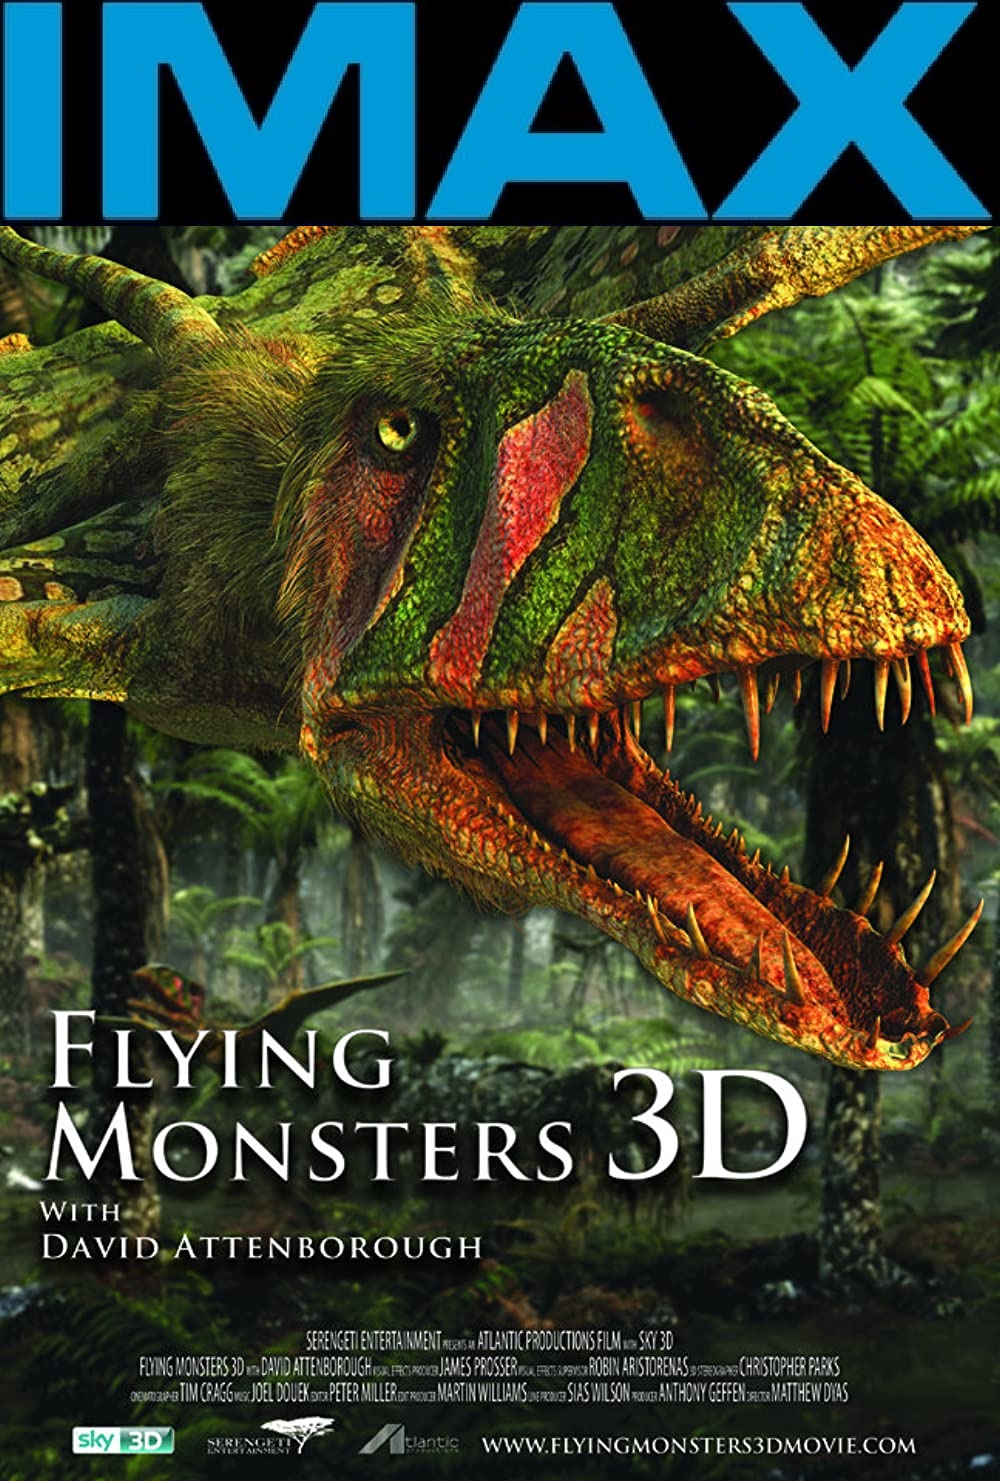 EN - IMAX Flying Monsters With David Attenborough (2011)